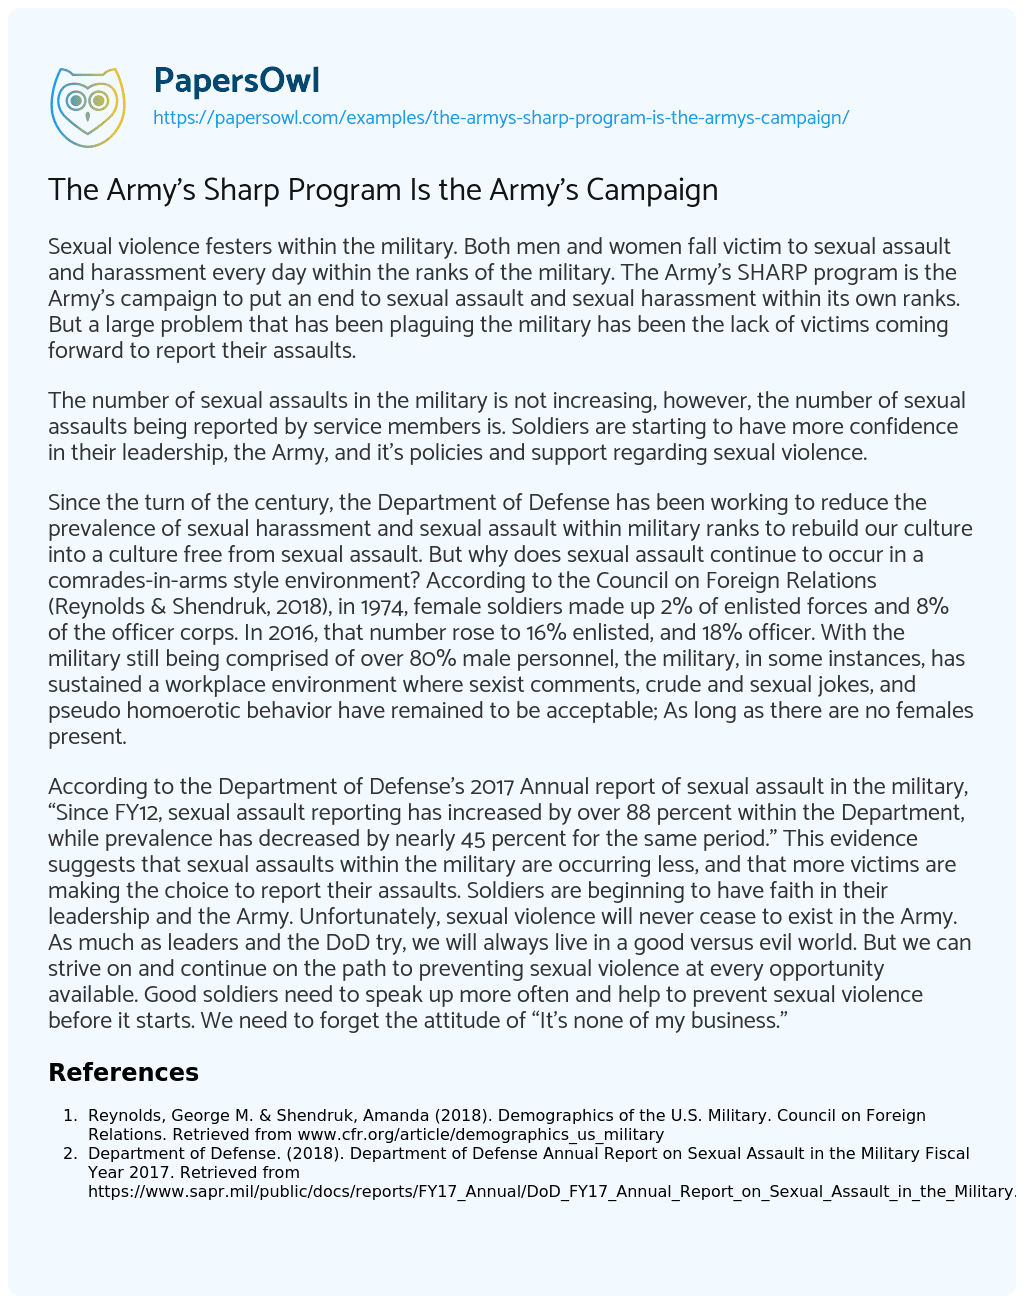 The Army’s Sharp Program is the Army’s Campaign essay